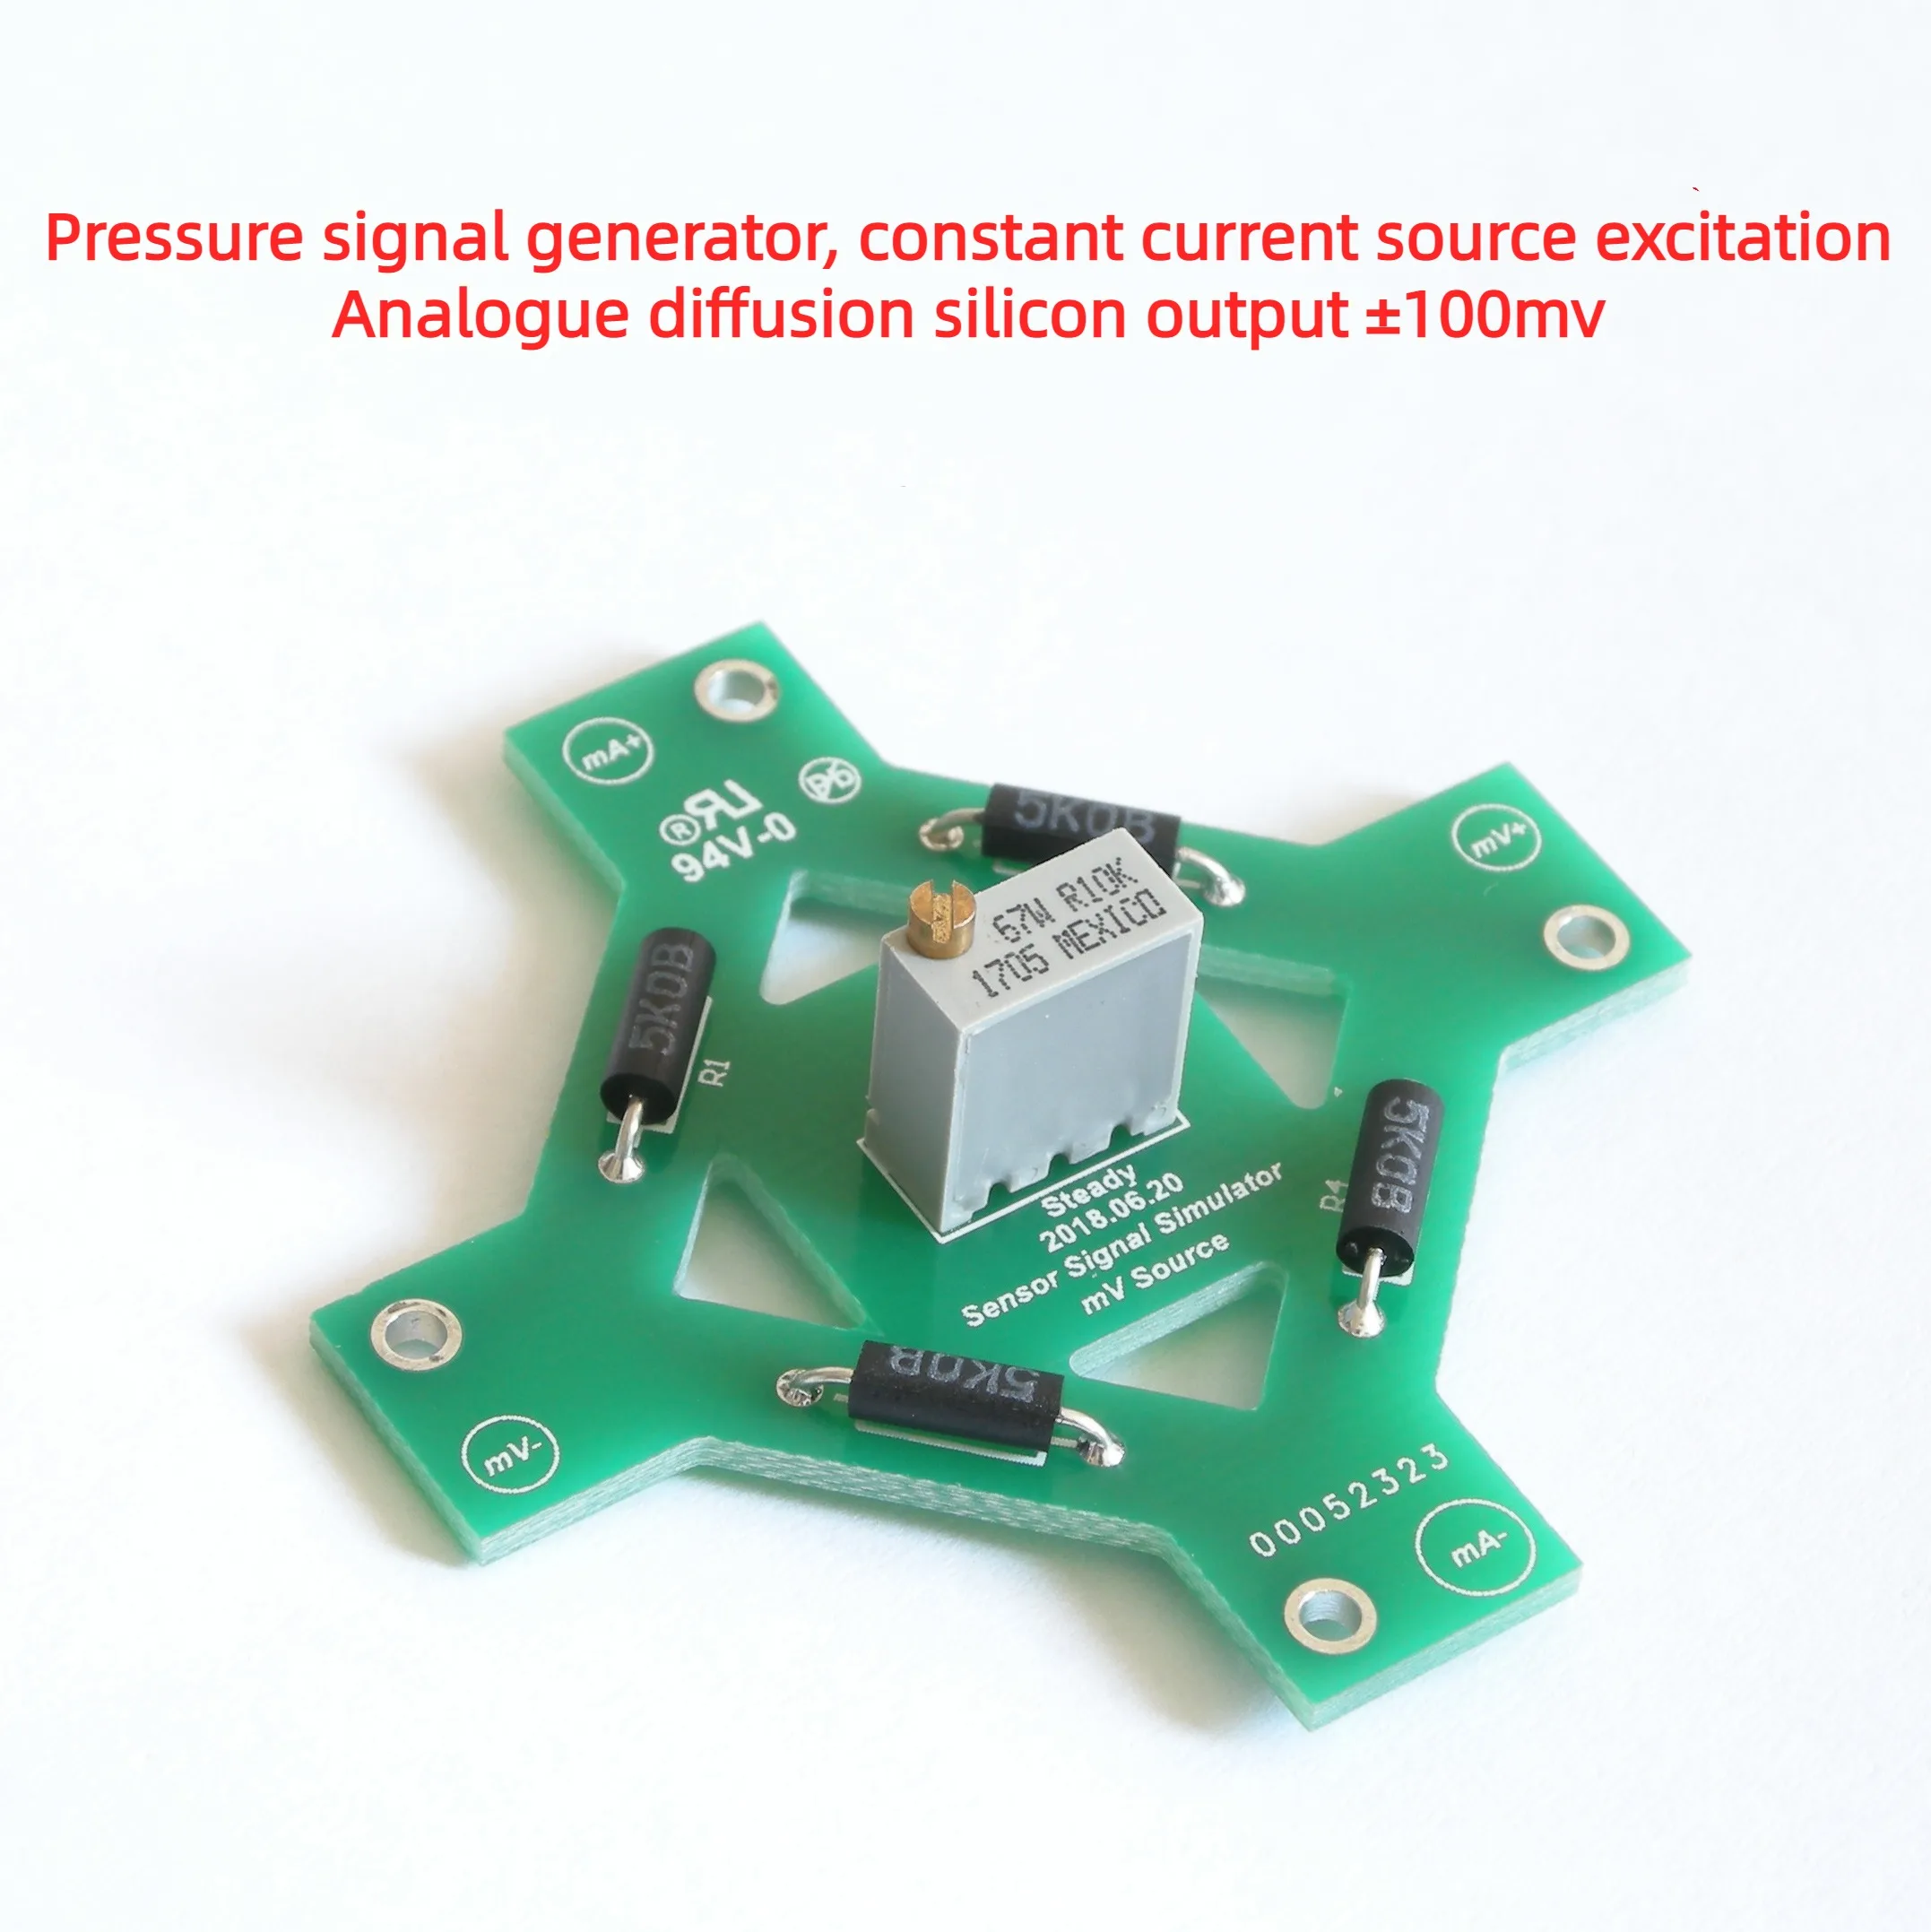 

Pressure Signal Generator, Constant Current Source Excitation Analog Diffused Silicon Output 100mv